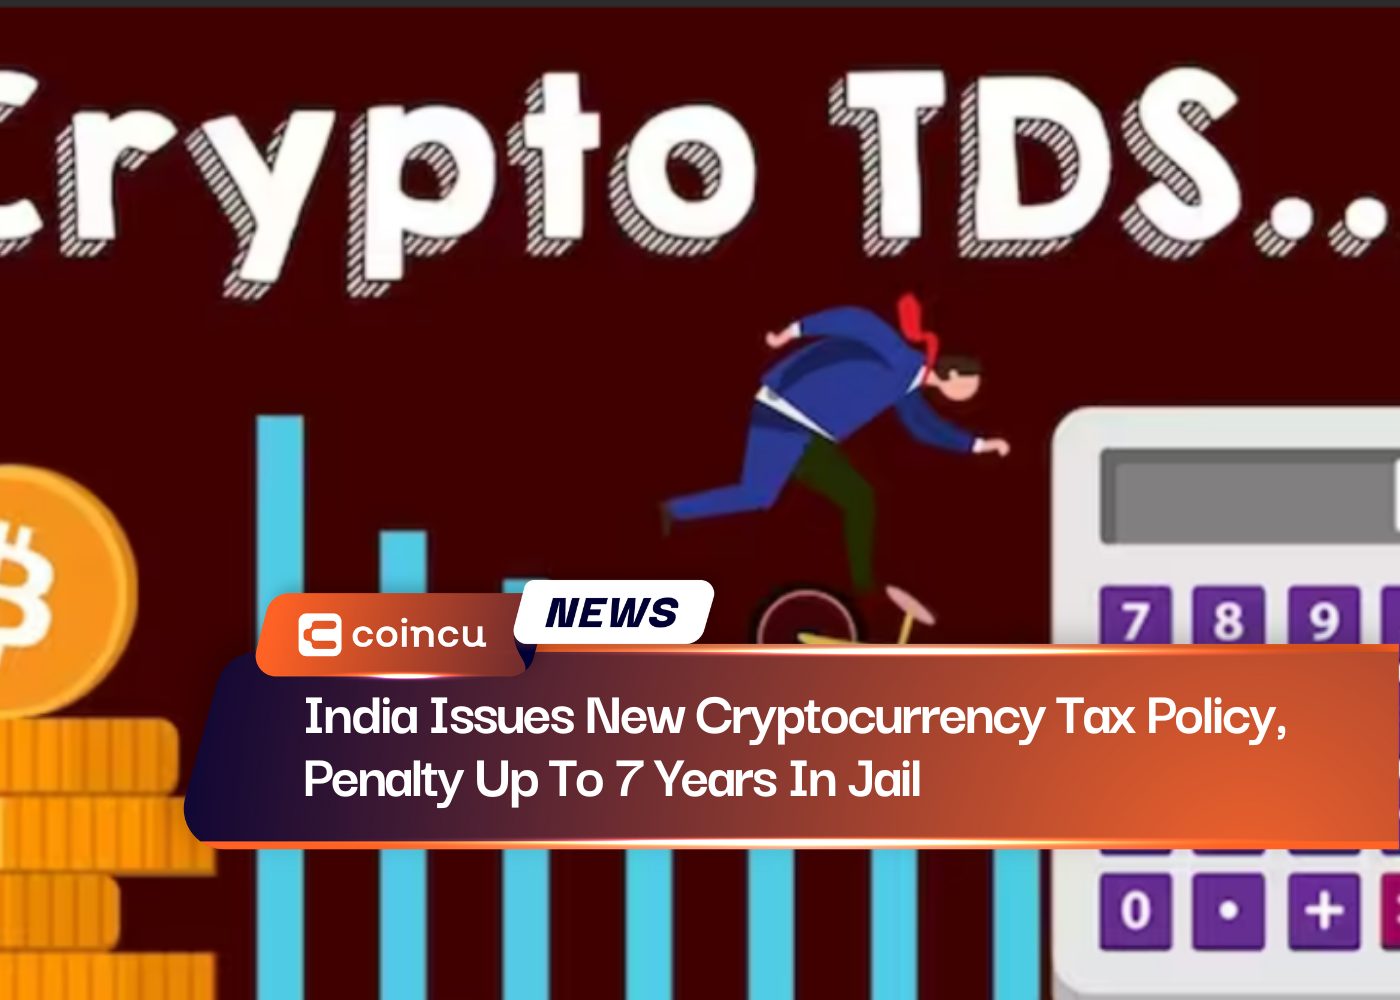 India Issues New Cryptocurrency Tax Policy, Penalty Up To 7 Years In Jail